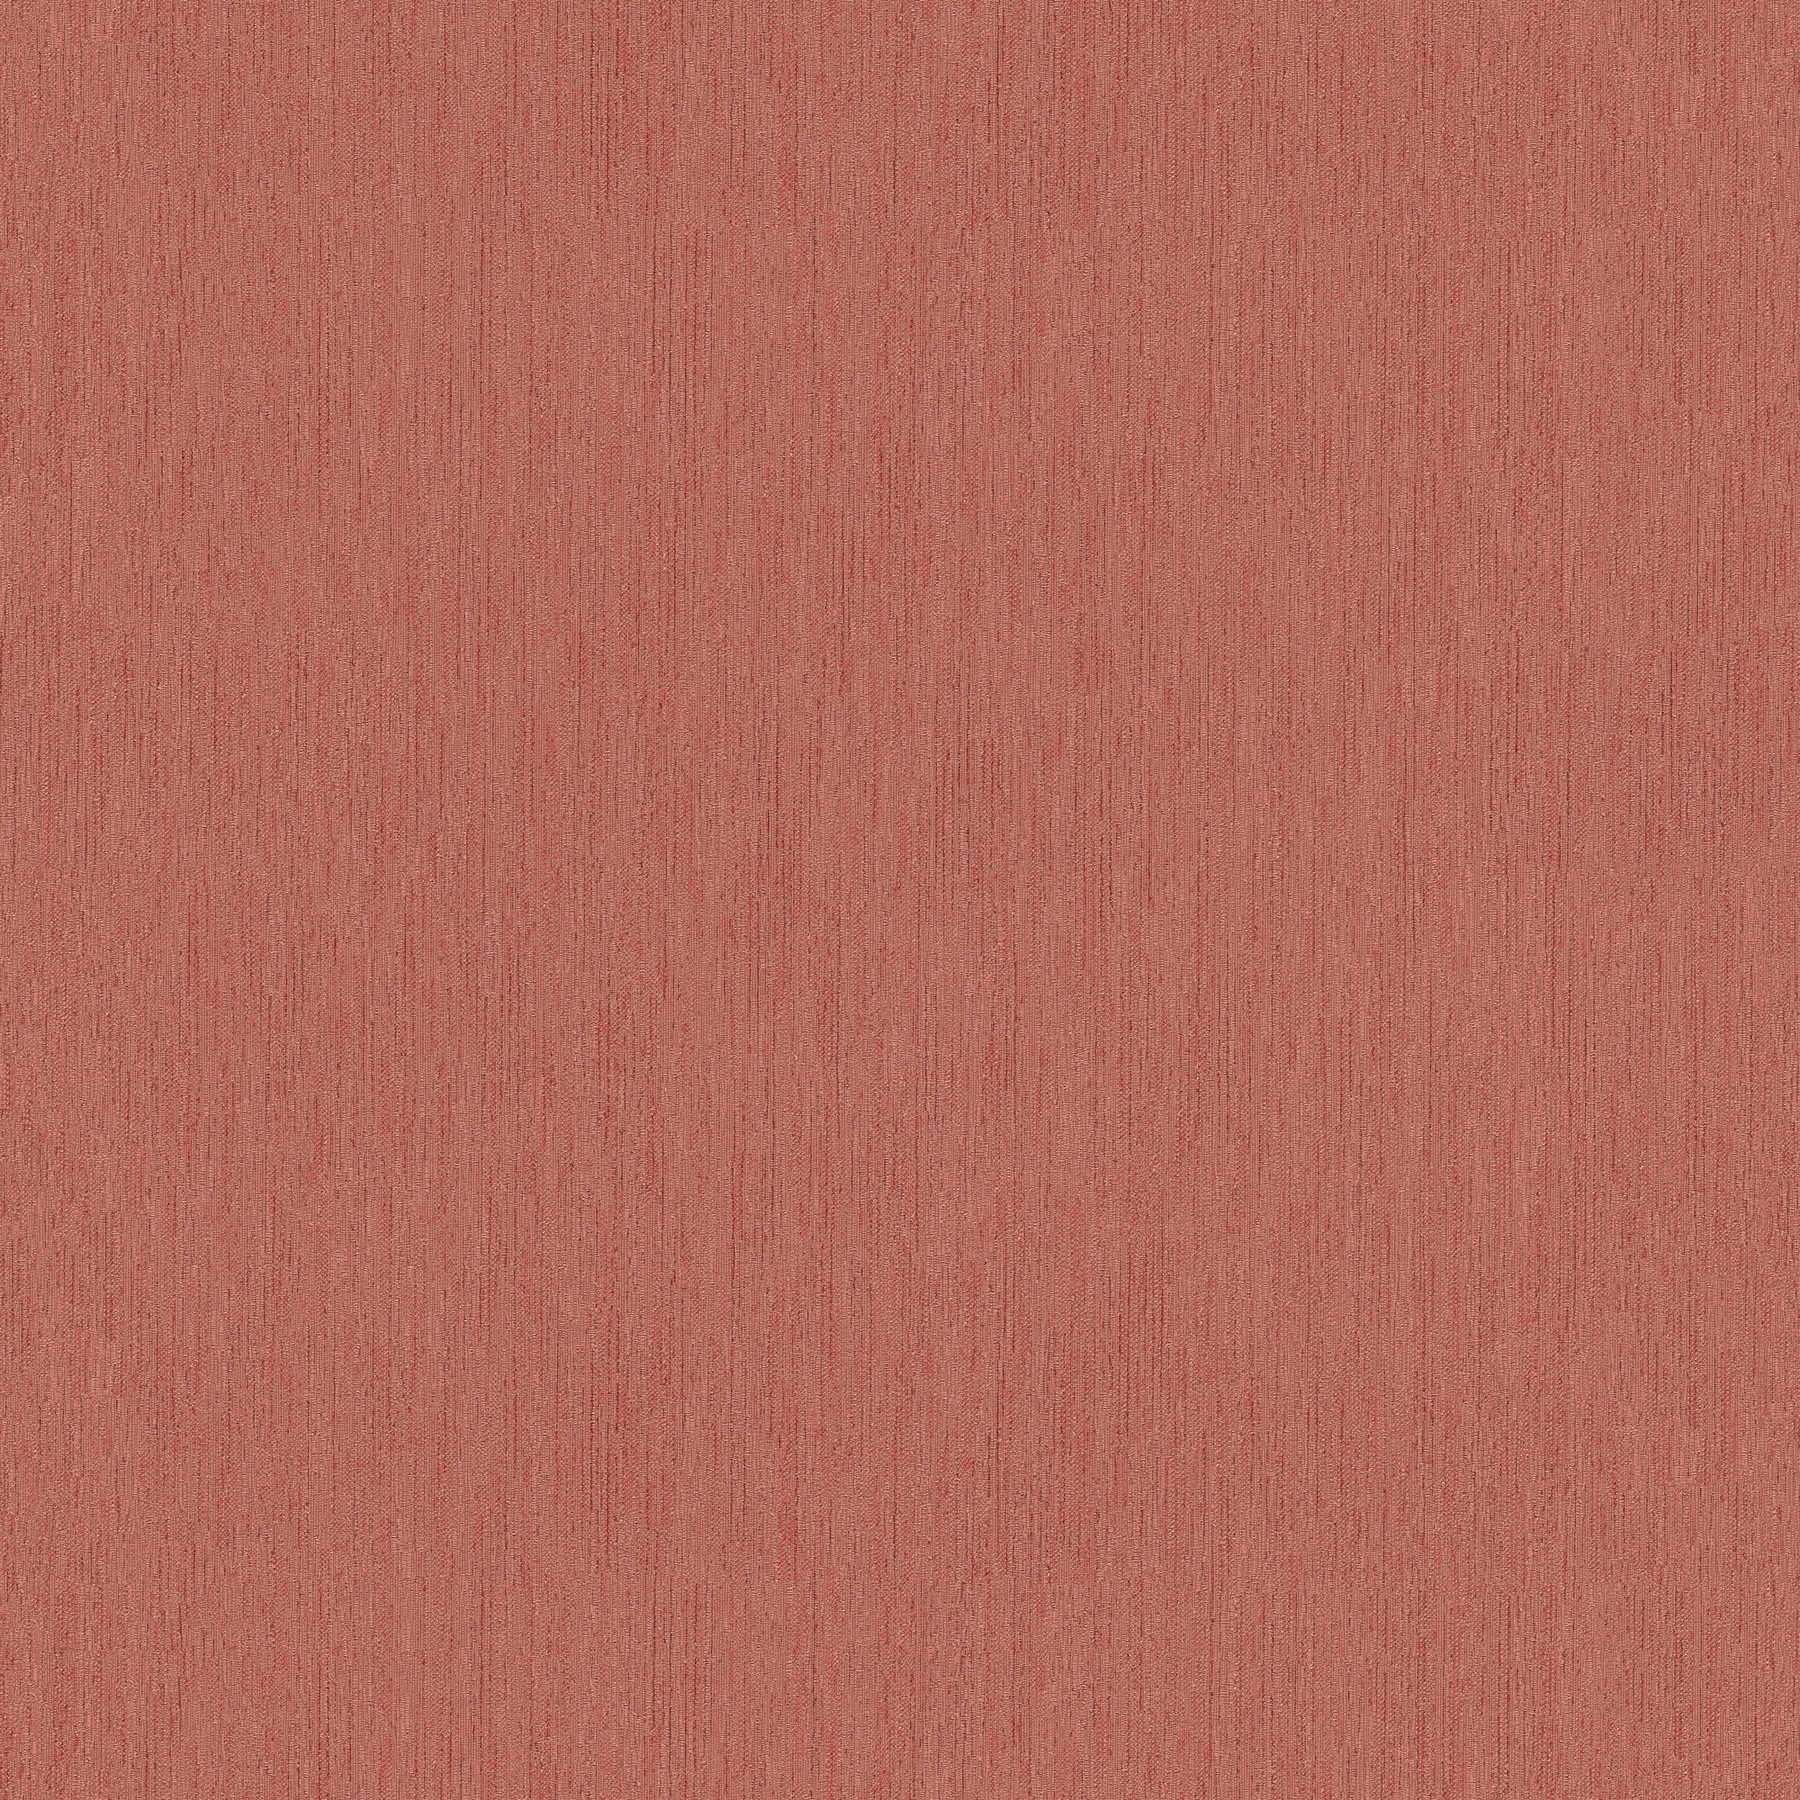 Wallpaper rust red non-woven with structure design - 70cm wide
